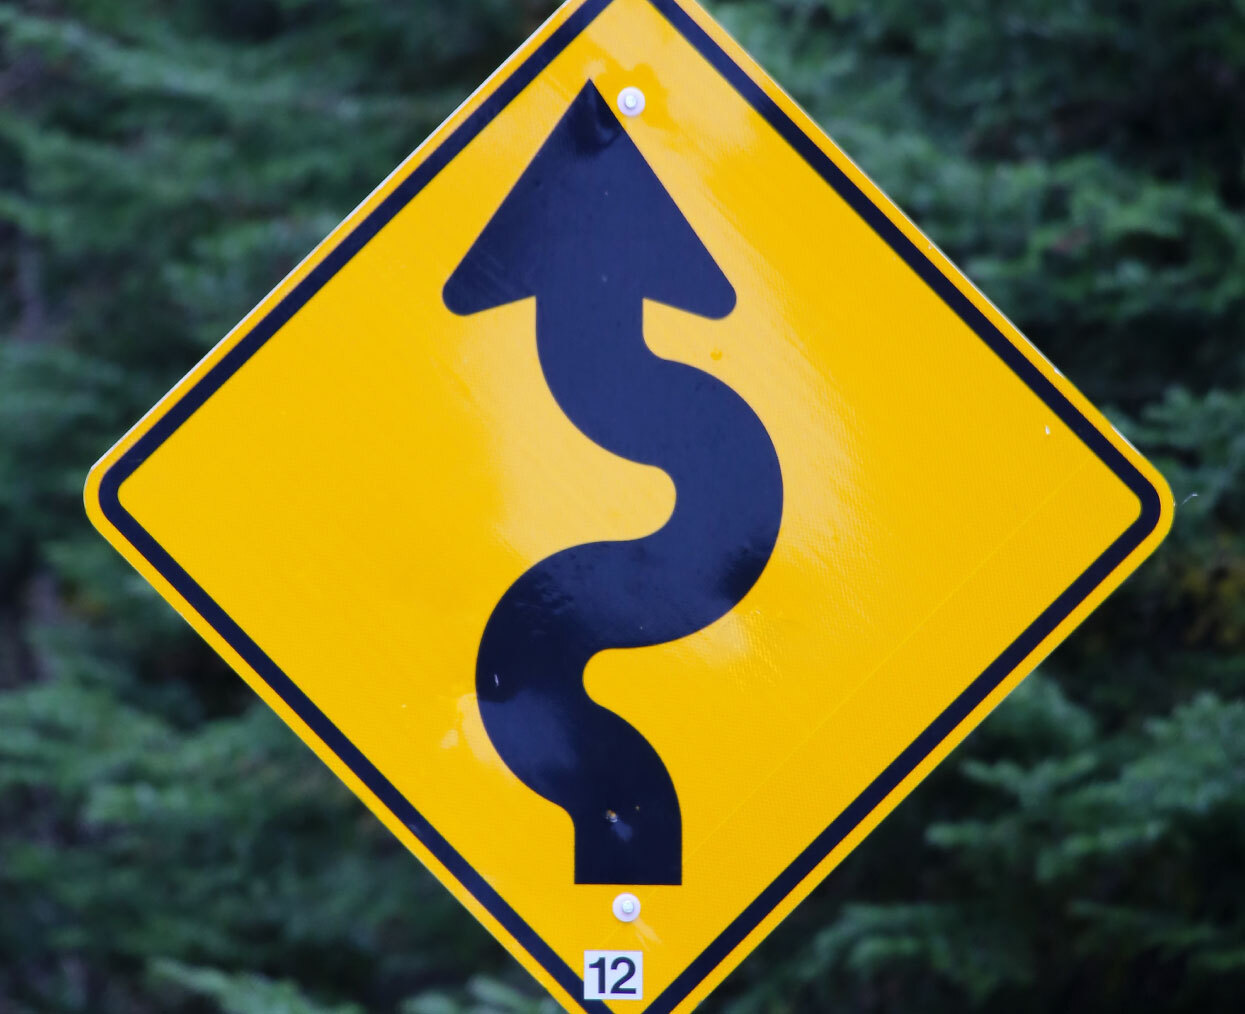 Road sign showing windy road